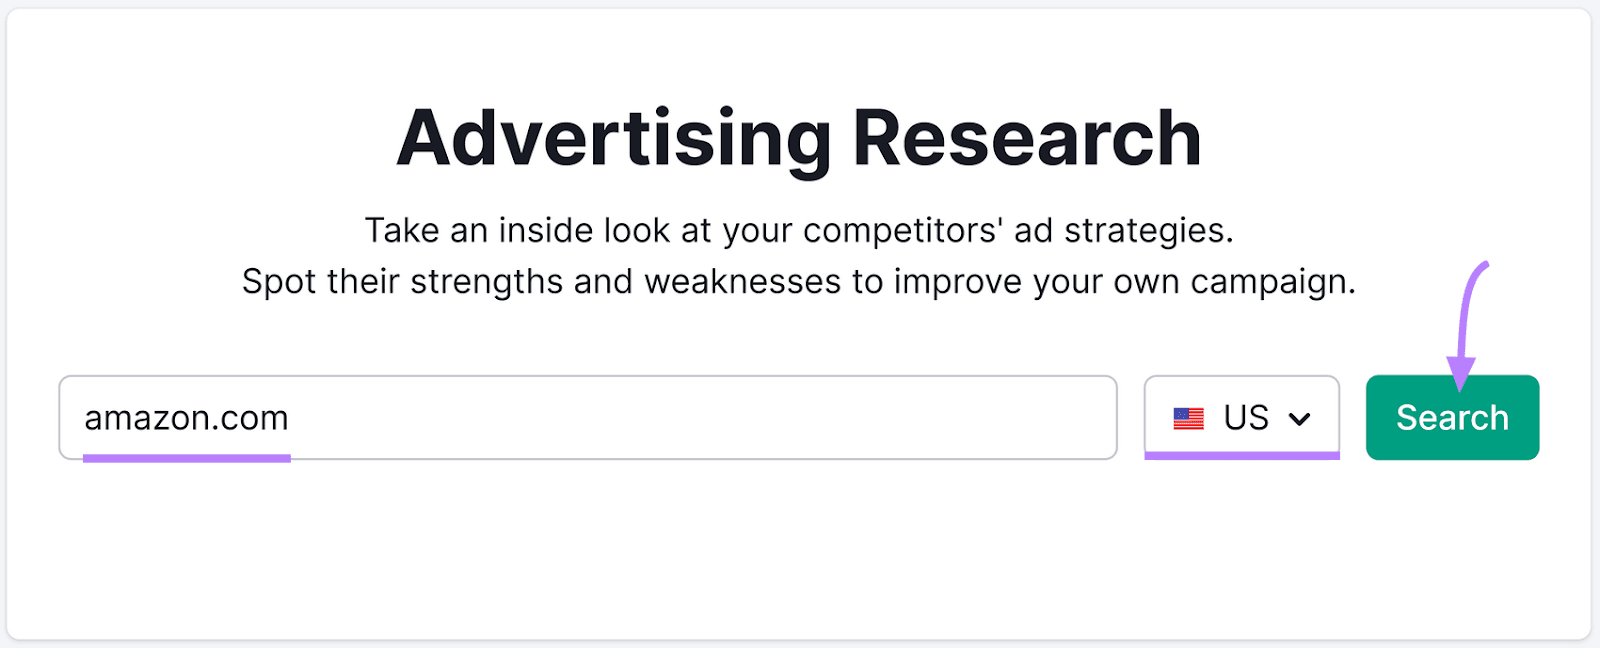 "amazon.com" entered into the Advertising Research hunt  bar